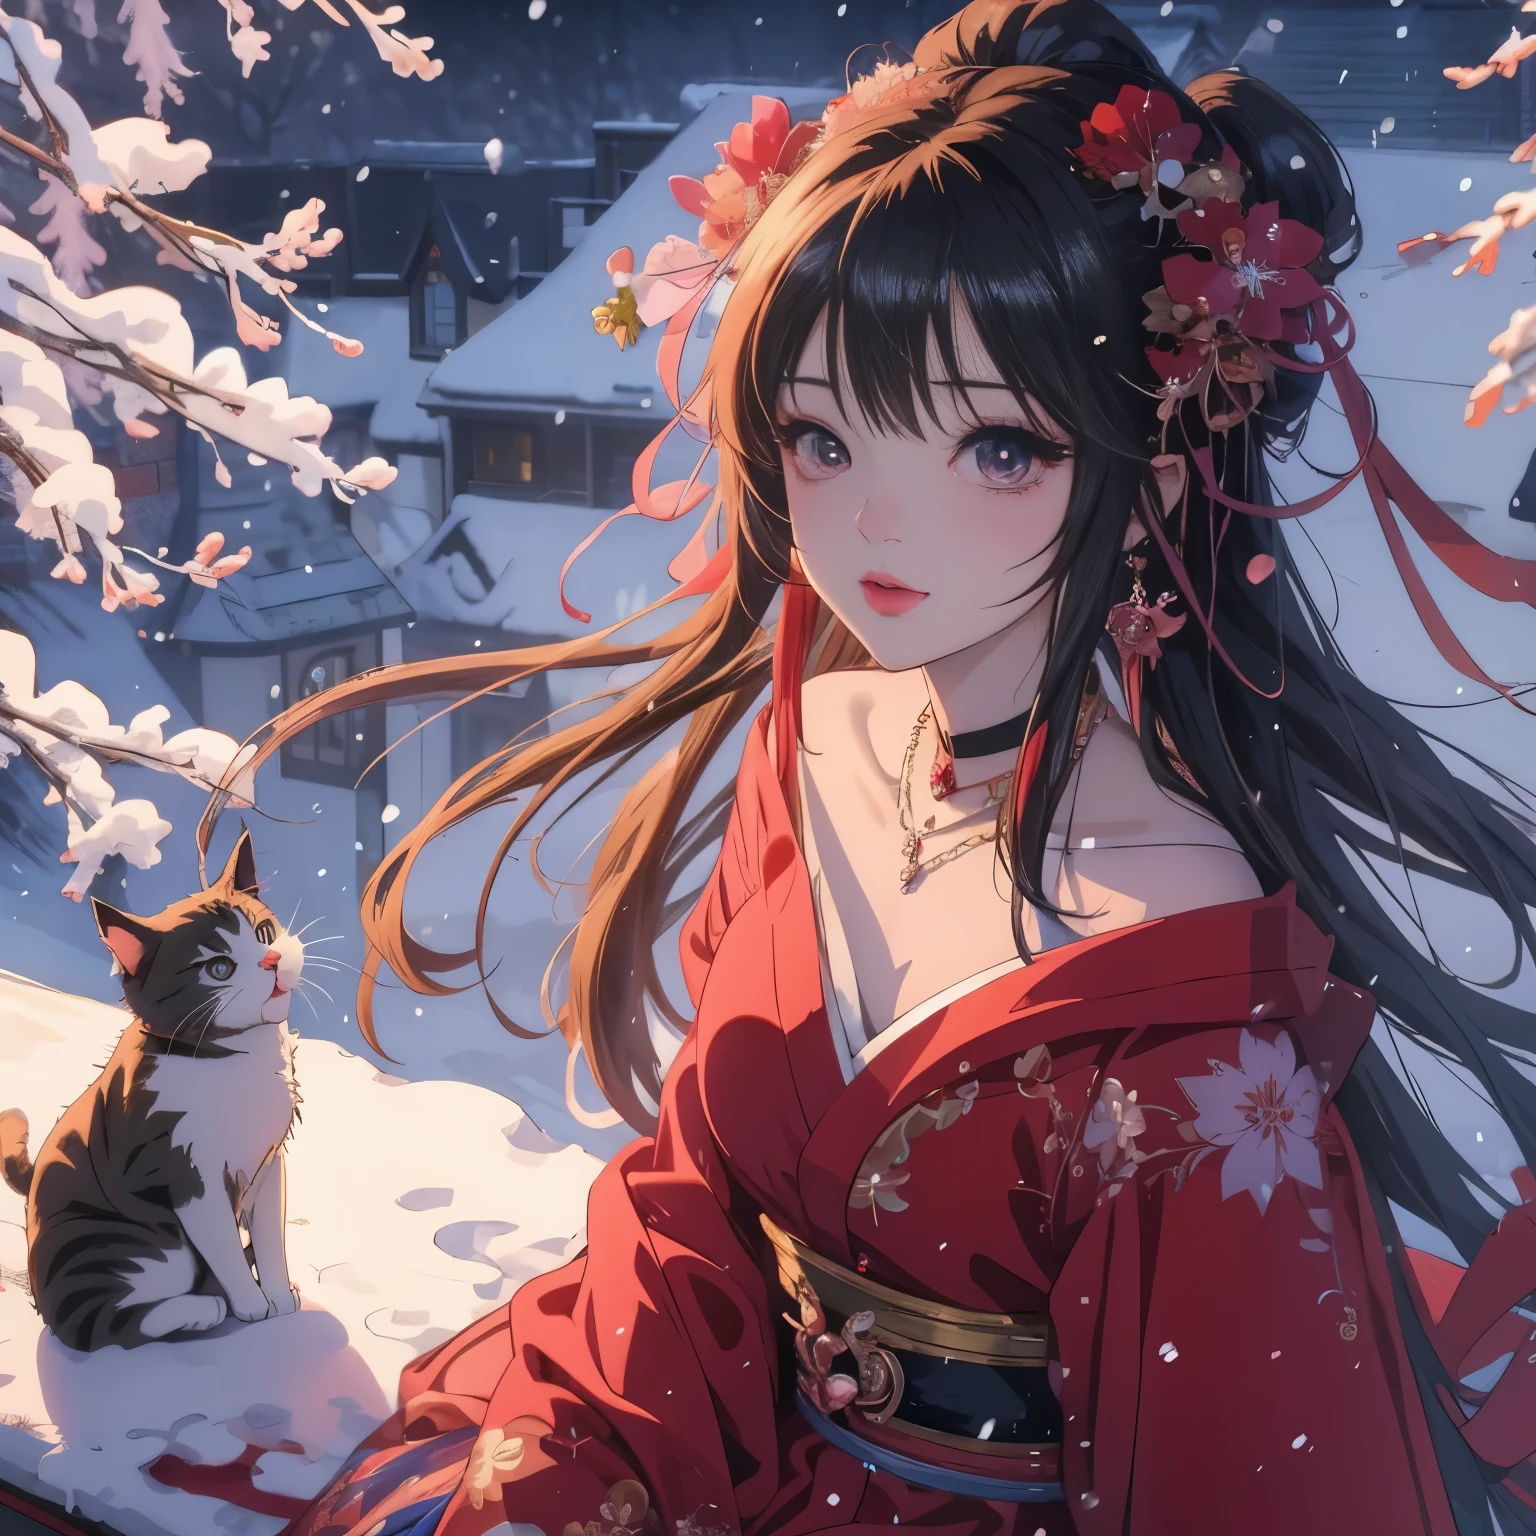 Anime girl with a cat sitting on a ledge in the snow, anime style 4k, Anime Art Wallpaper 4k, anime art wallpaper 4k, anime wallpaper 4k, anime wallpaper 4k, Beautiful anime girl, 4k anime wallpaper, Beautiful anime, anime art wallpaper 8k, Beautiful anime portrait, Beautiful anime woman, 4k comic wallpaper